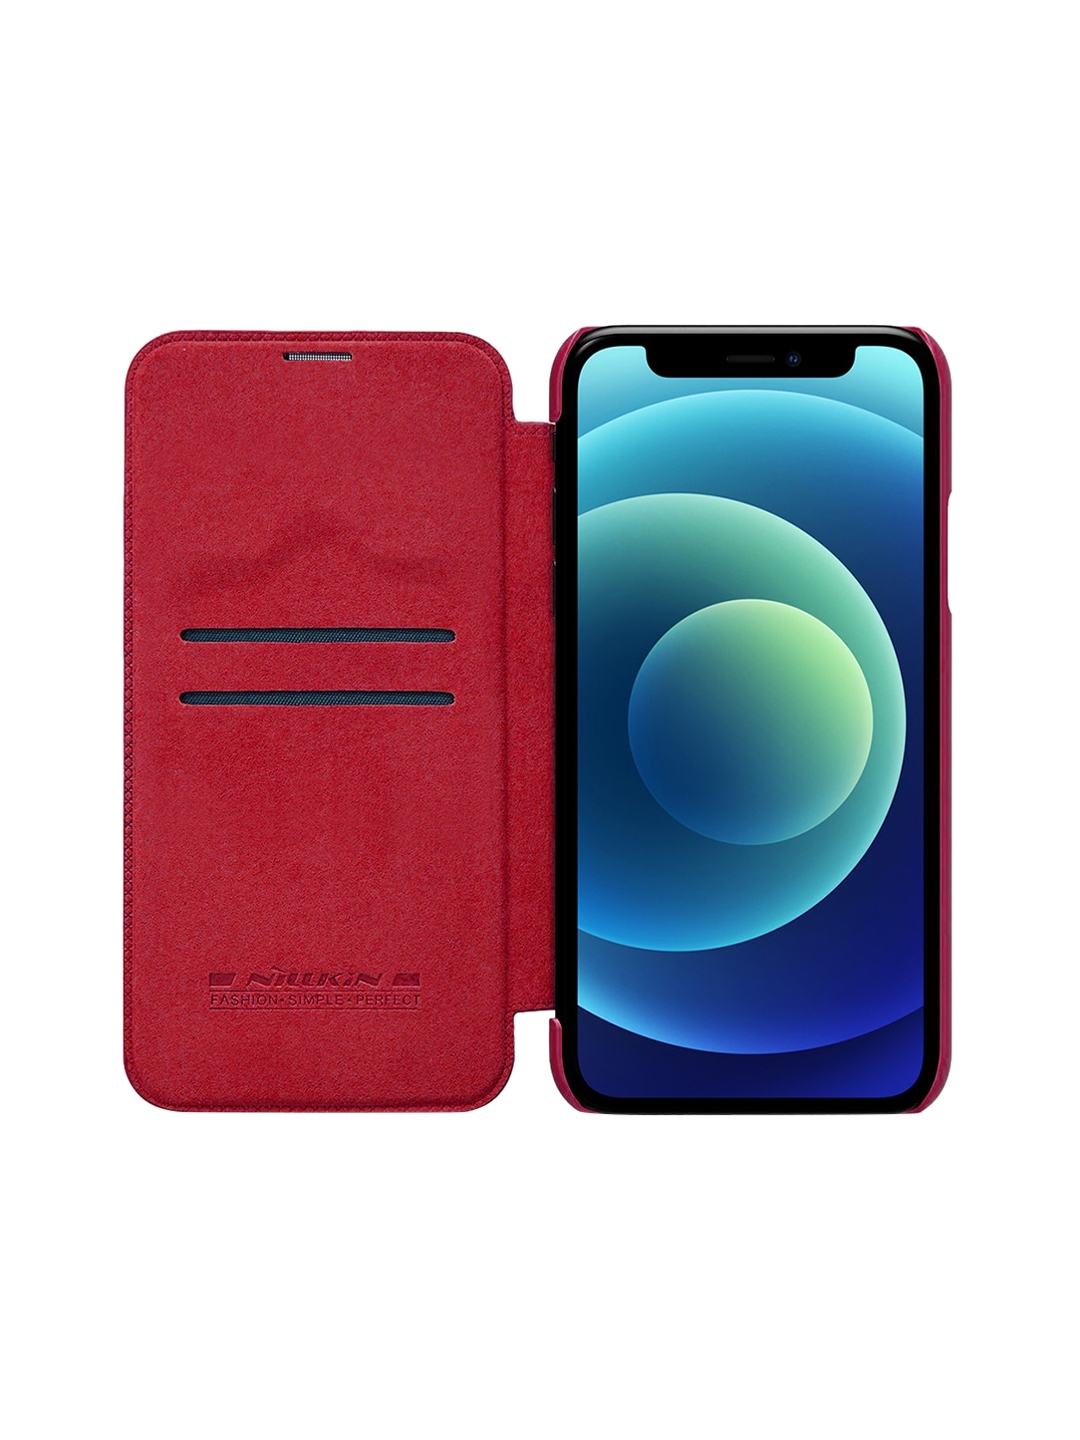 TREEMODA Red Solid iPhone 12 Pro Max Leather Flip Cover